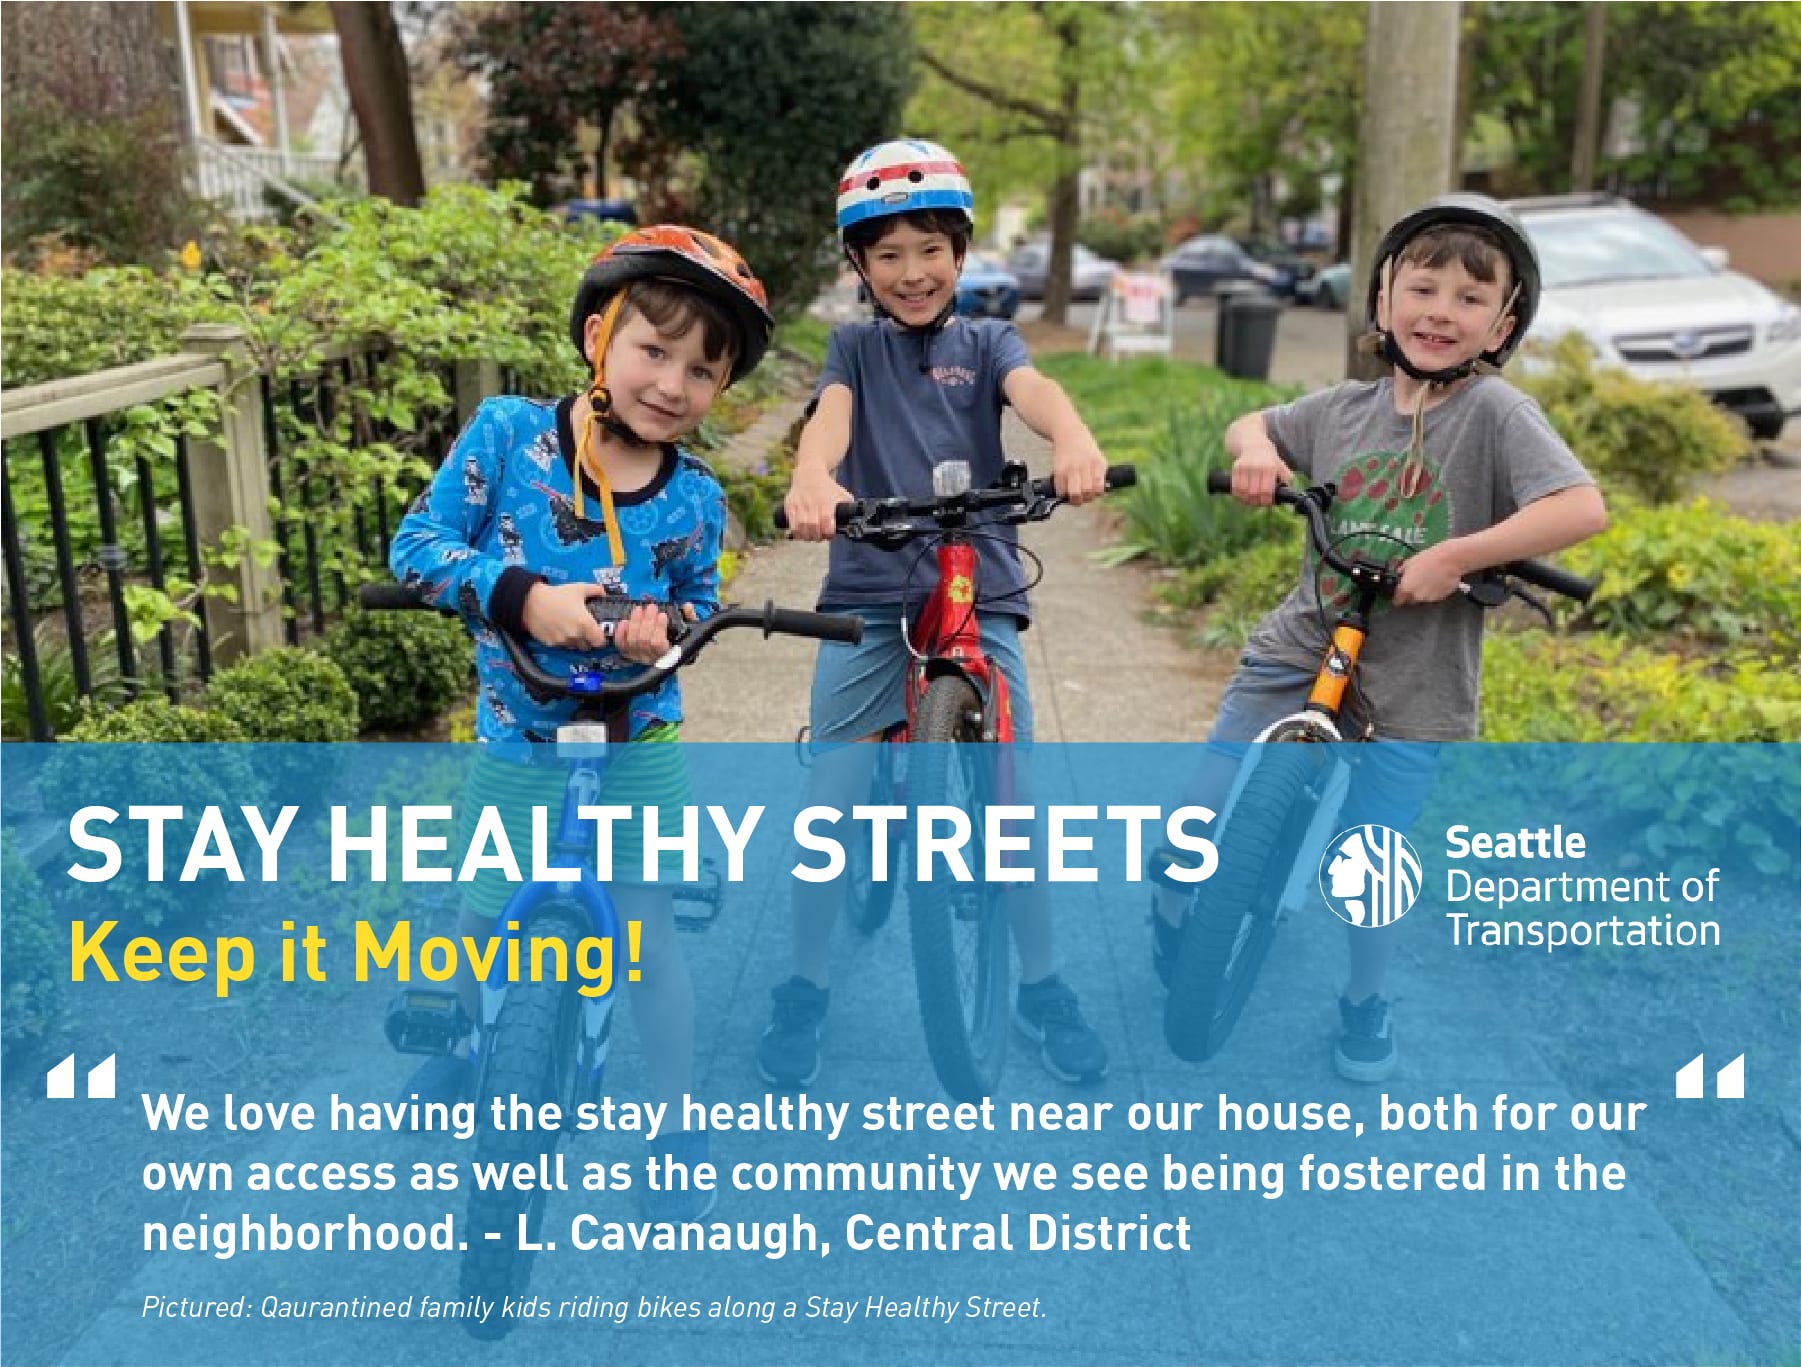 Quote: "We love having the stay healthy street near our house, both for our own access as well as the community we see being fostered in the neighborhood." by L. Cavanaugh